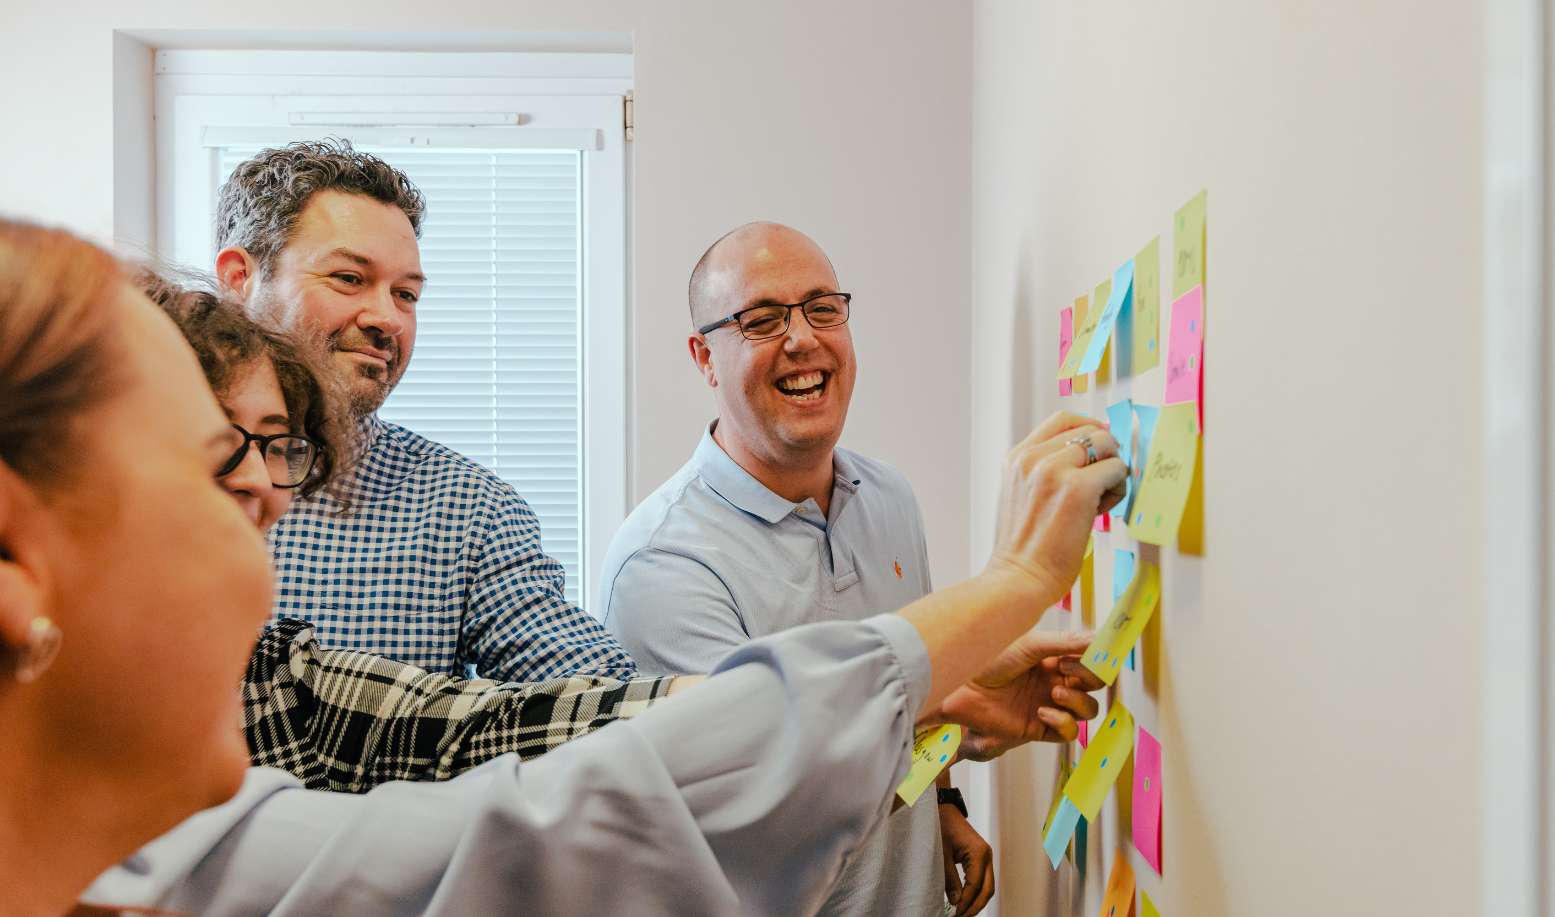 A group of people smiling and adding Post-It notes to a whiteboard